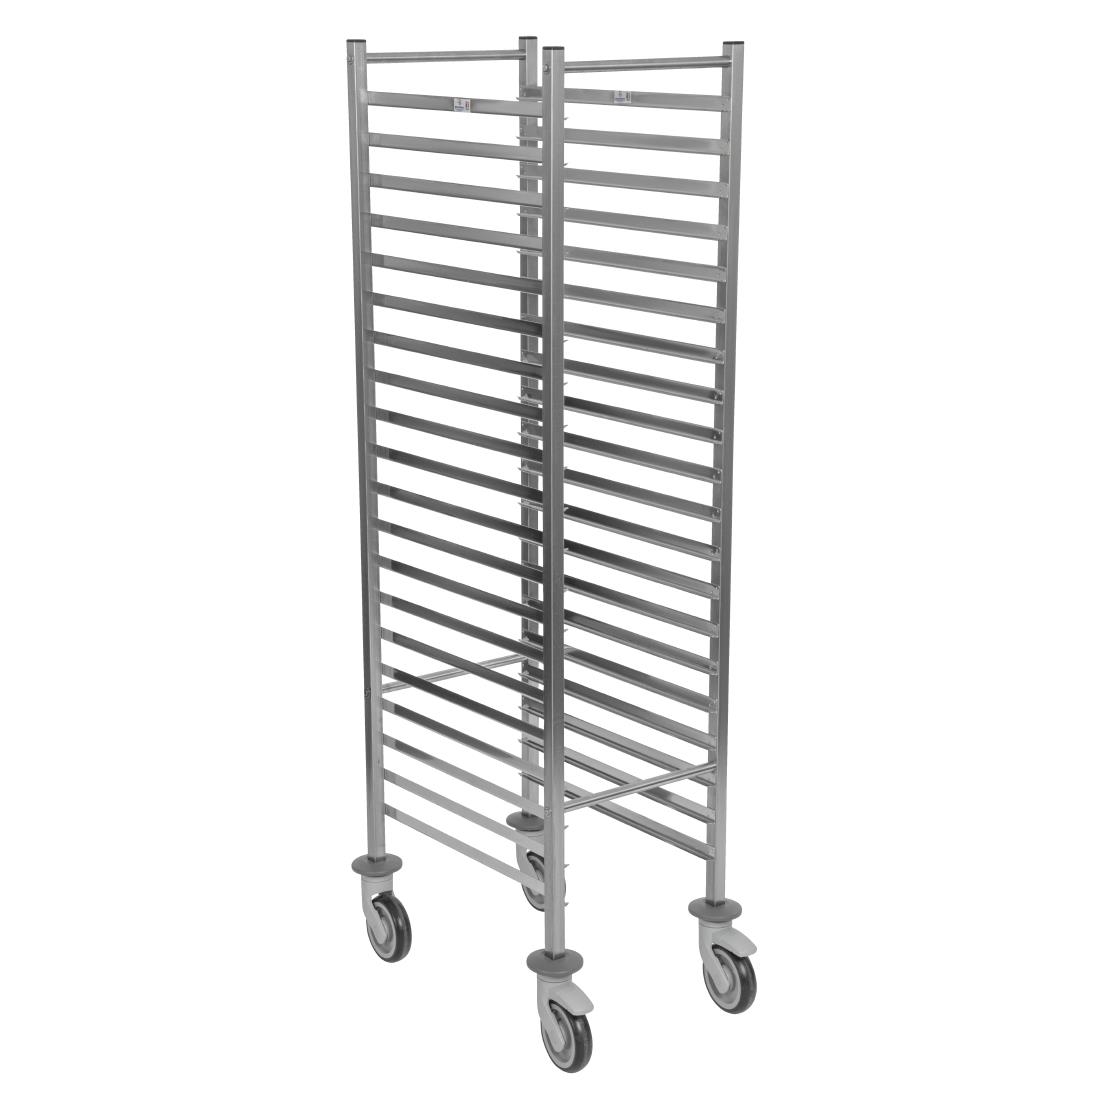 Matfer Bourgeat 20 Level Gastronorm Flat Pack Racking Trolley 1-1GN (CX728)